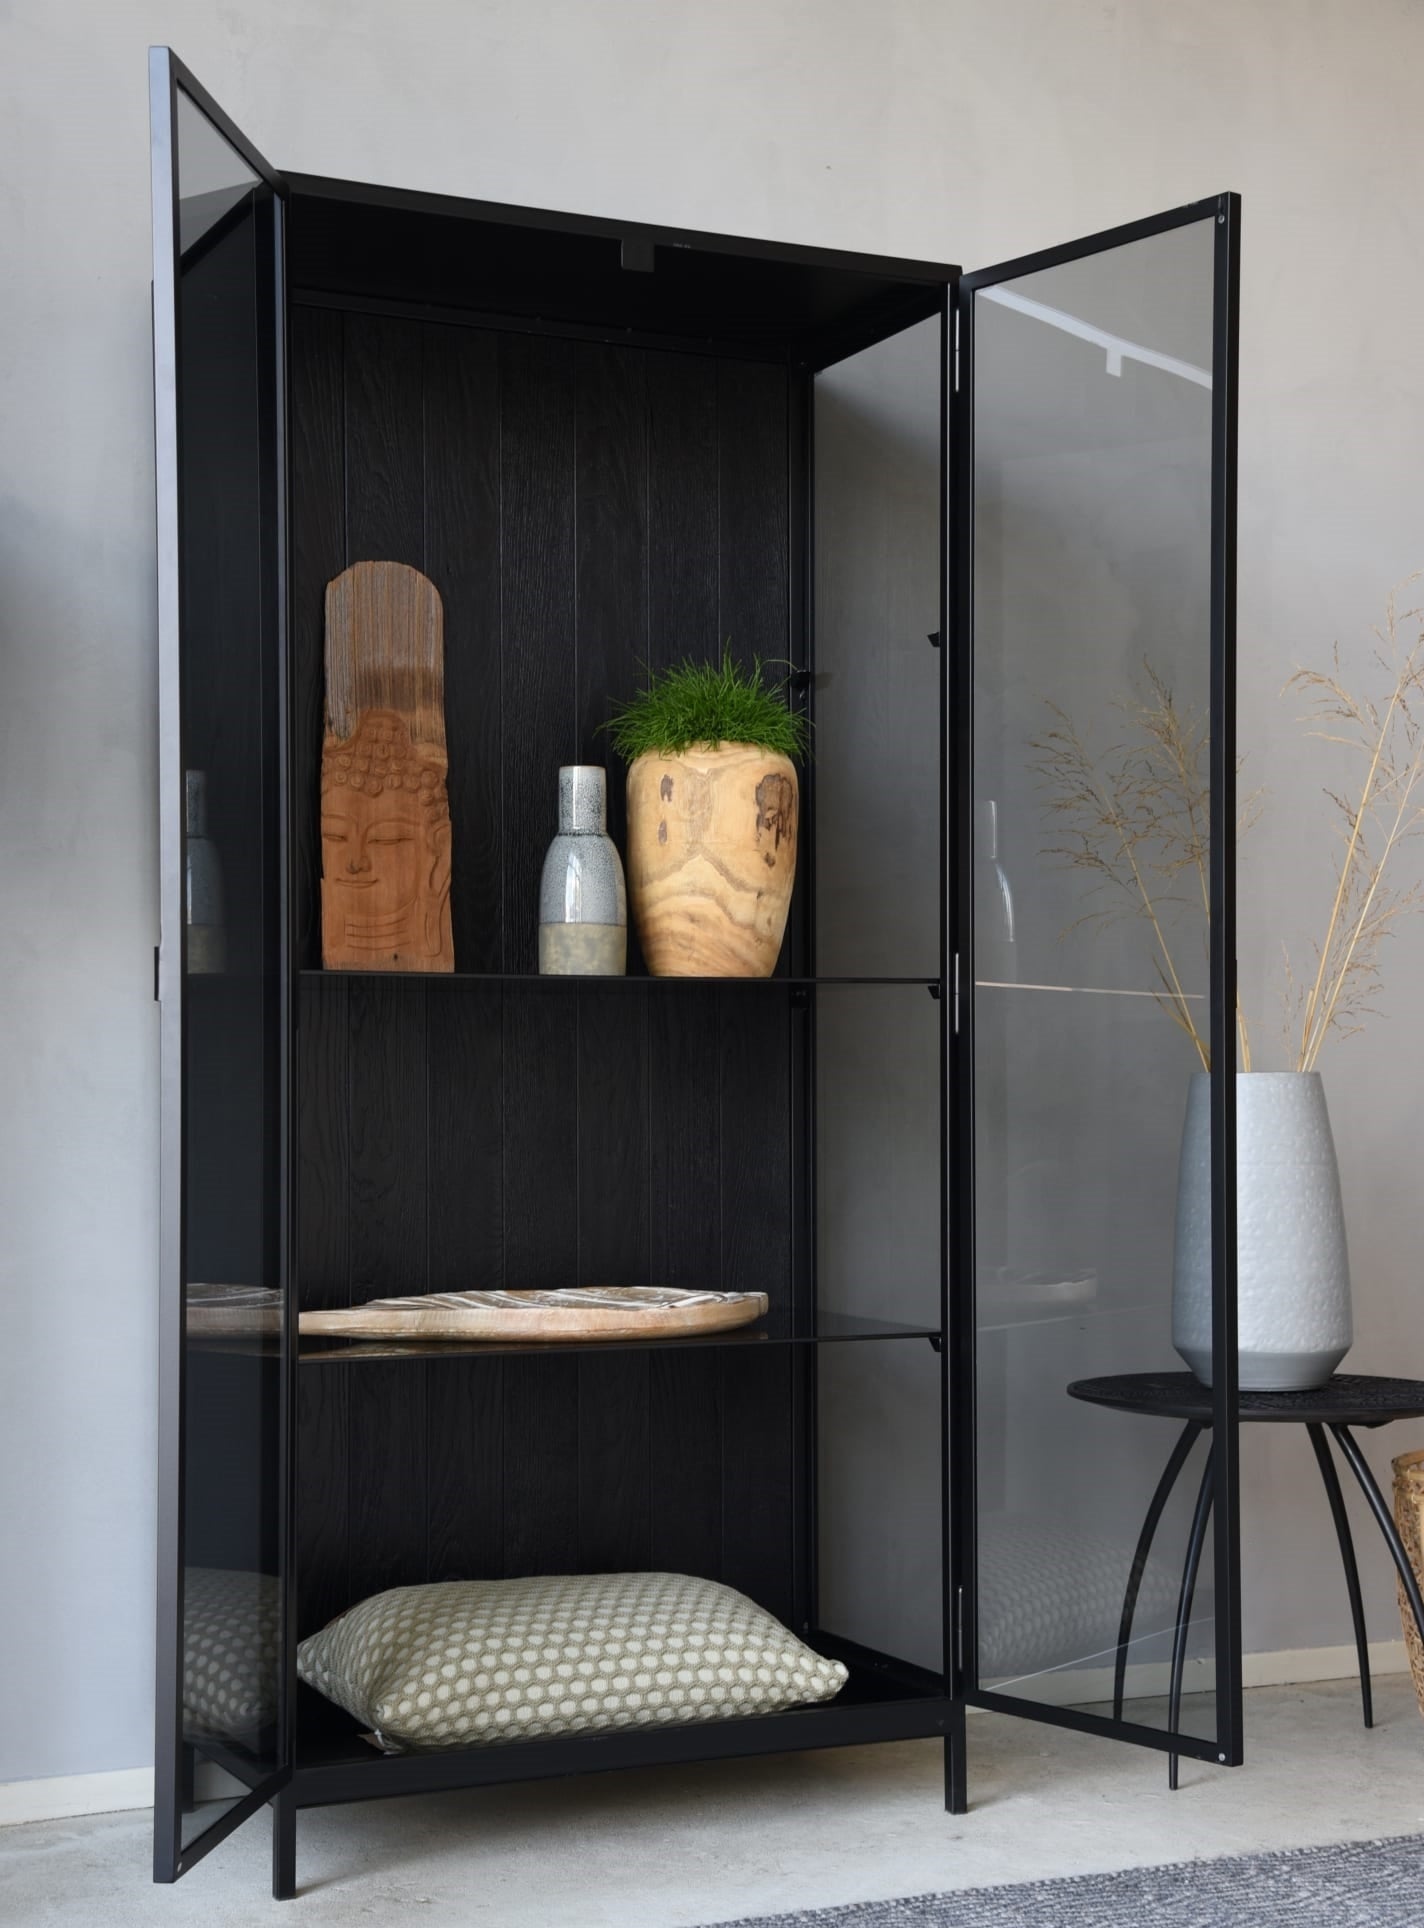 Ethnicraft Anders Storage Display Cabinet available from Make Your House A Home, Bendigo, Victoria, Australia